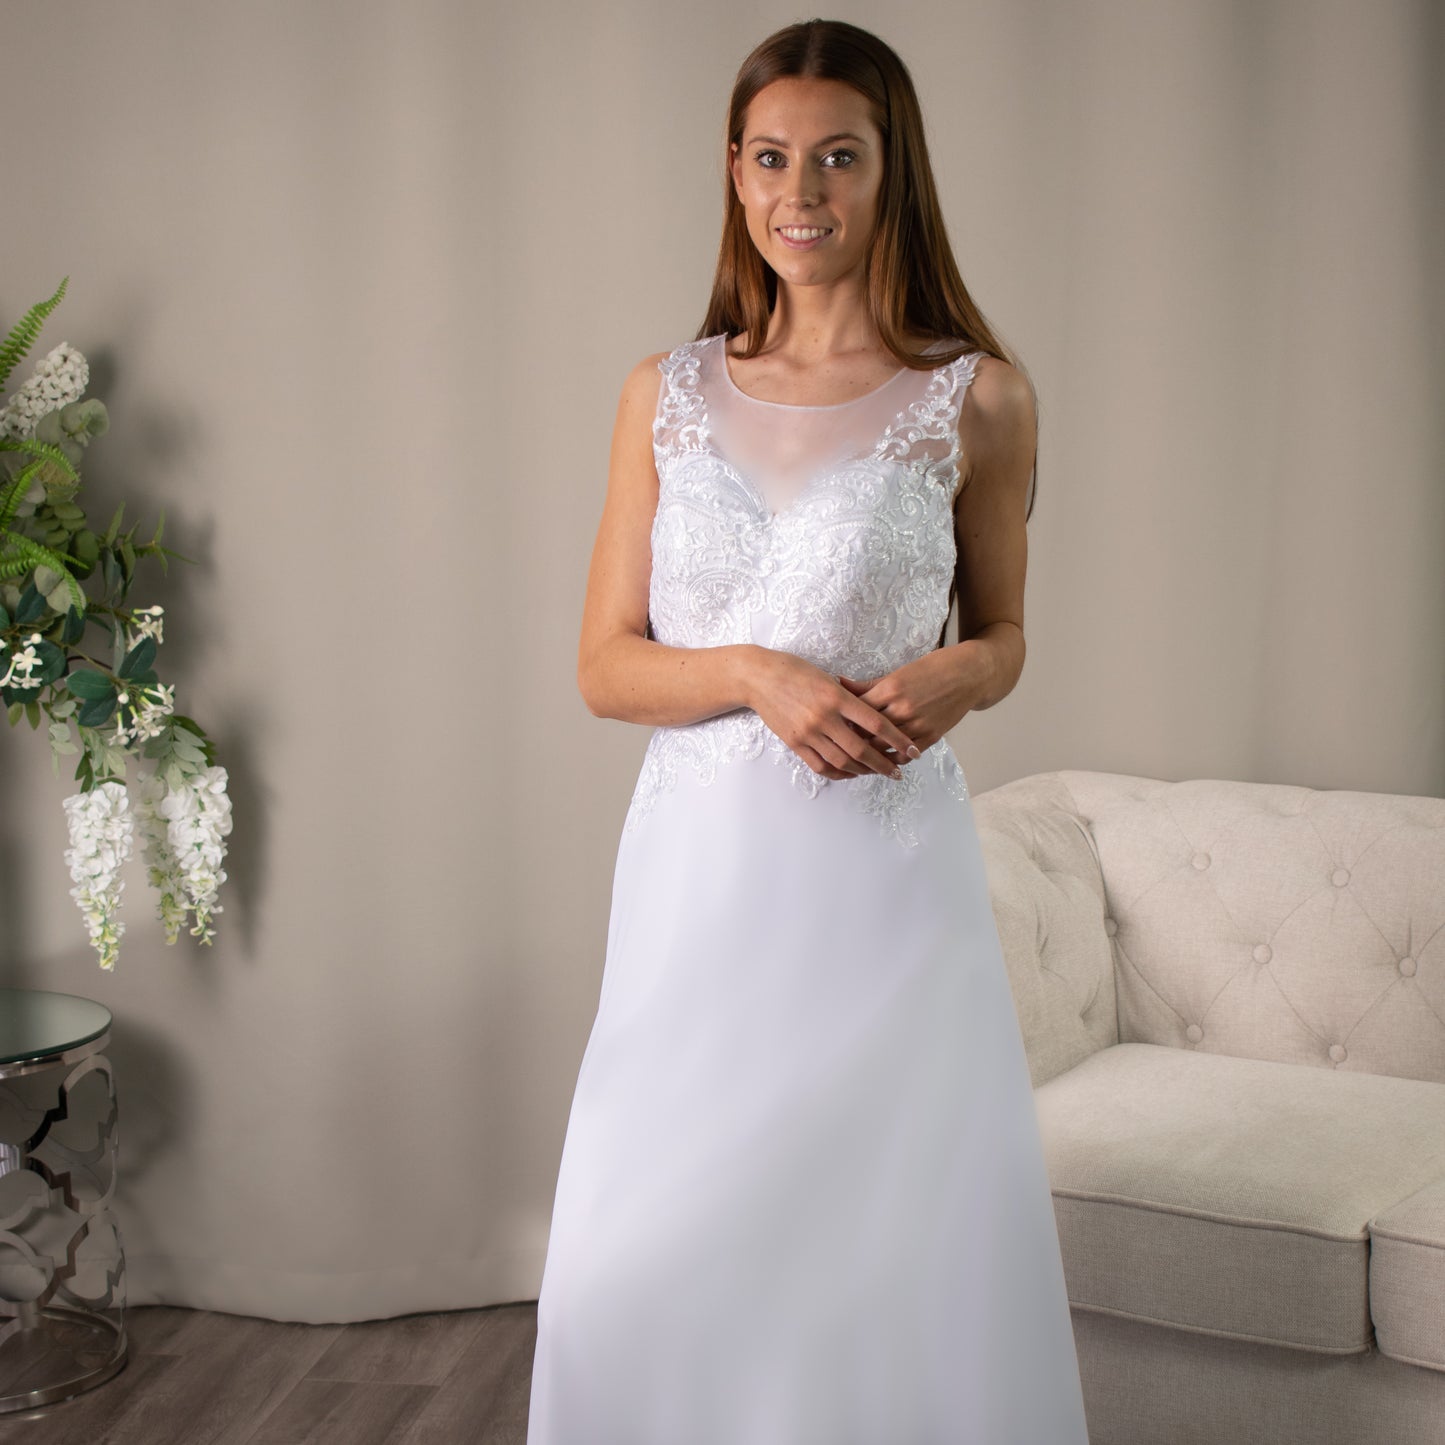 Cleo Lace Deb Dress by Divine Bridal with an Illusion Neckline and Chiffon A-line Skirt.